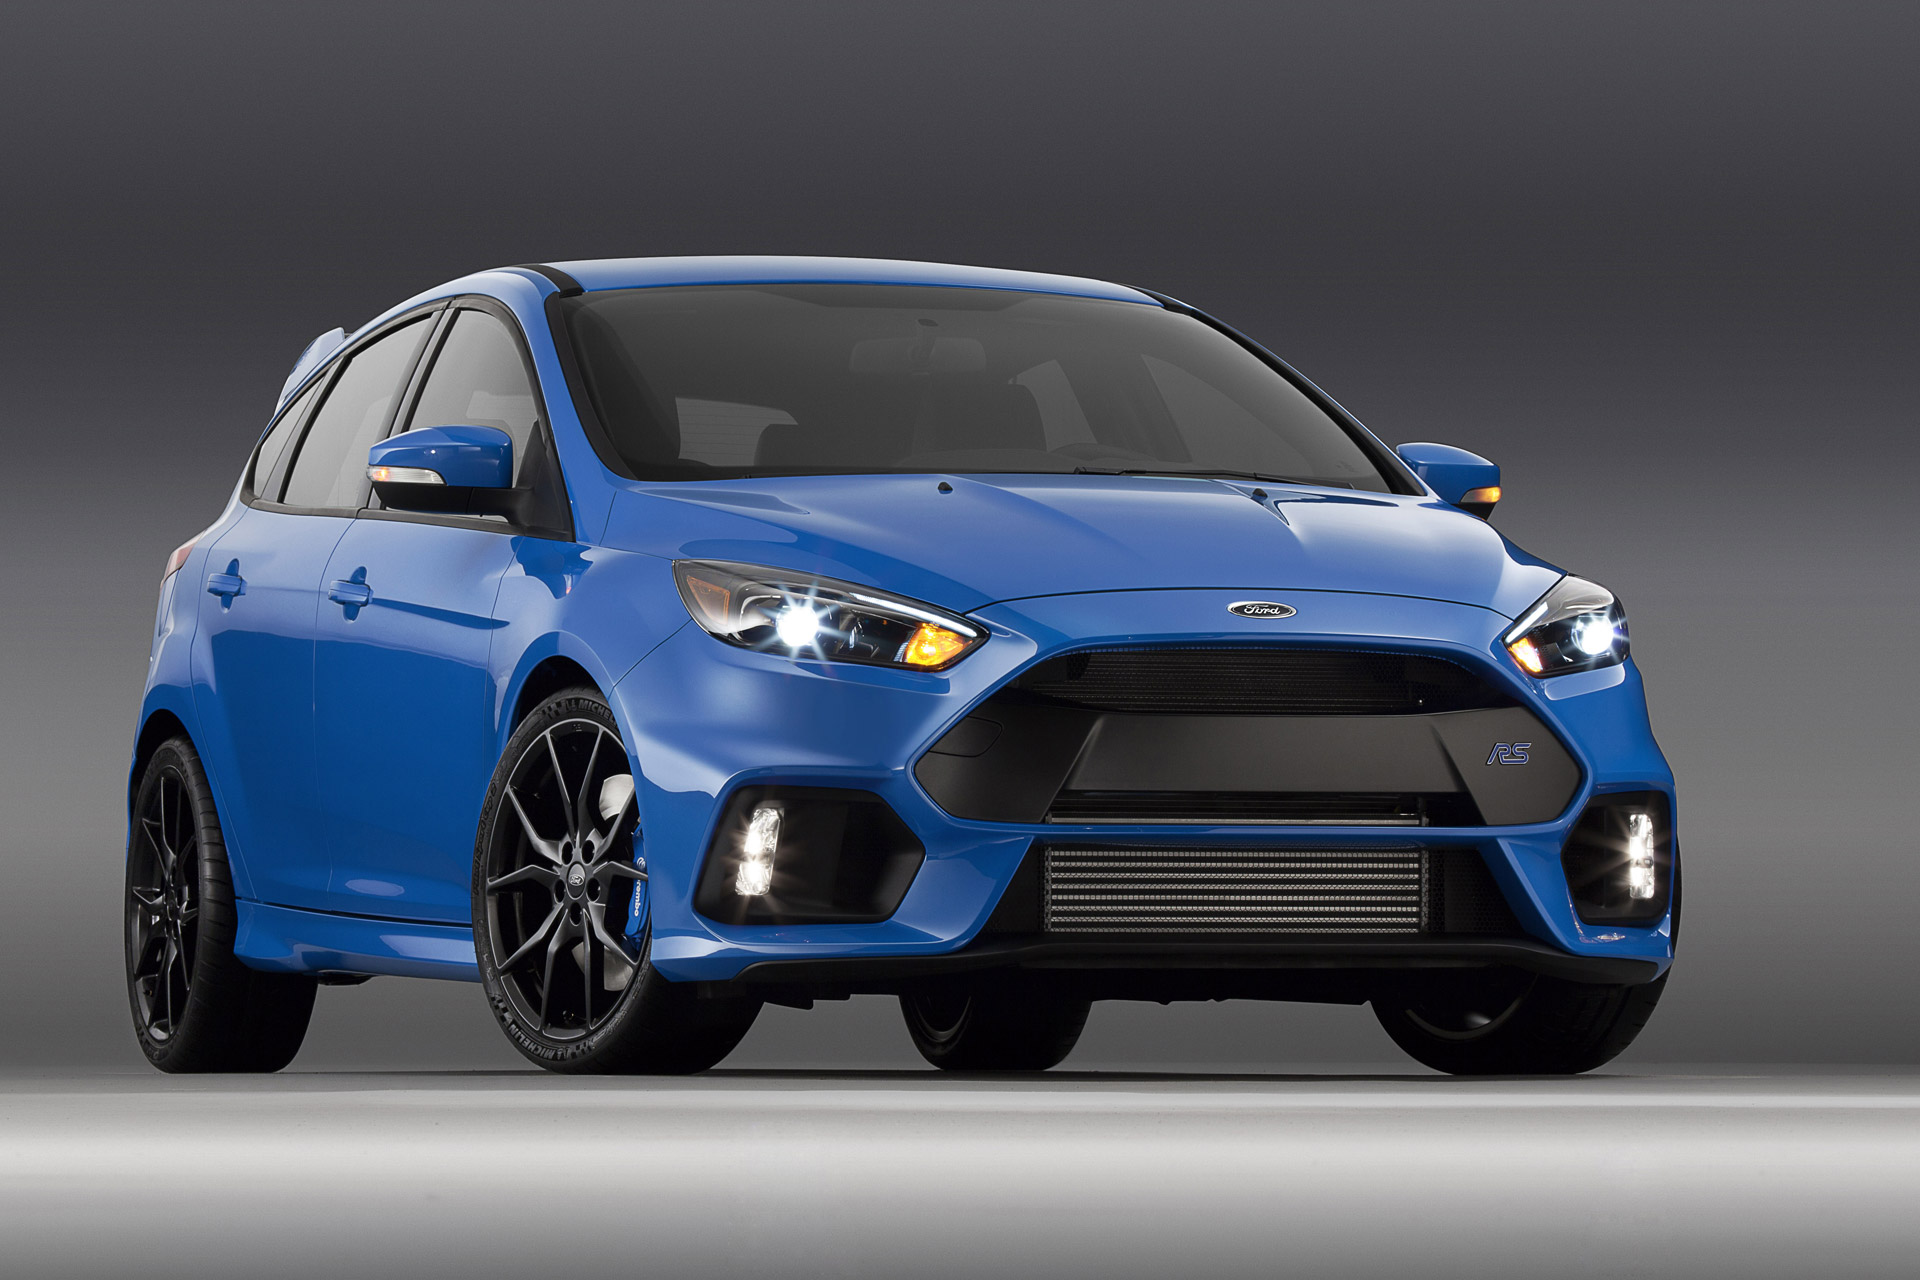 2016 Ford Focus In 4.7 Seconds, Top Speed Of MPH